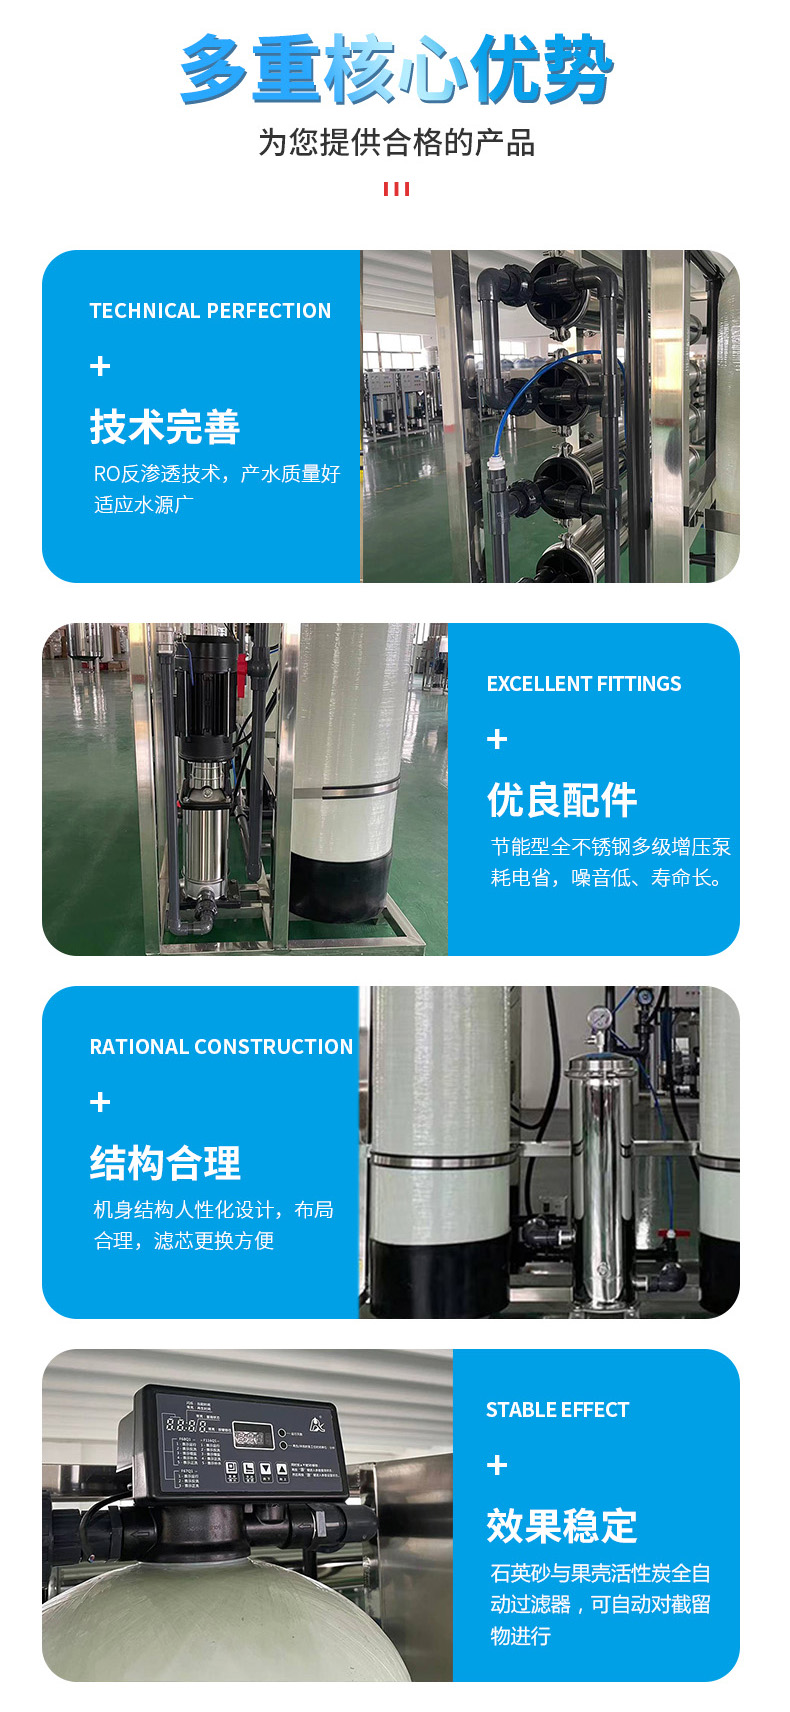 1 ton reverse osmosis equipment, 304 stainless steel material, pure water equipment, pure water treatment, direct drinking, simple operation